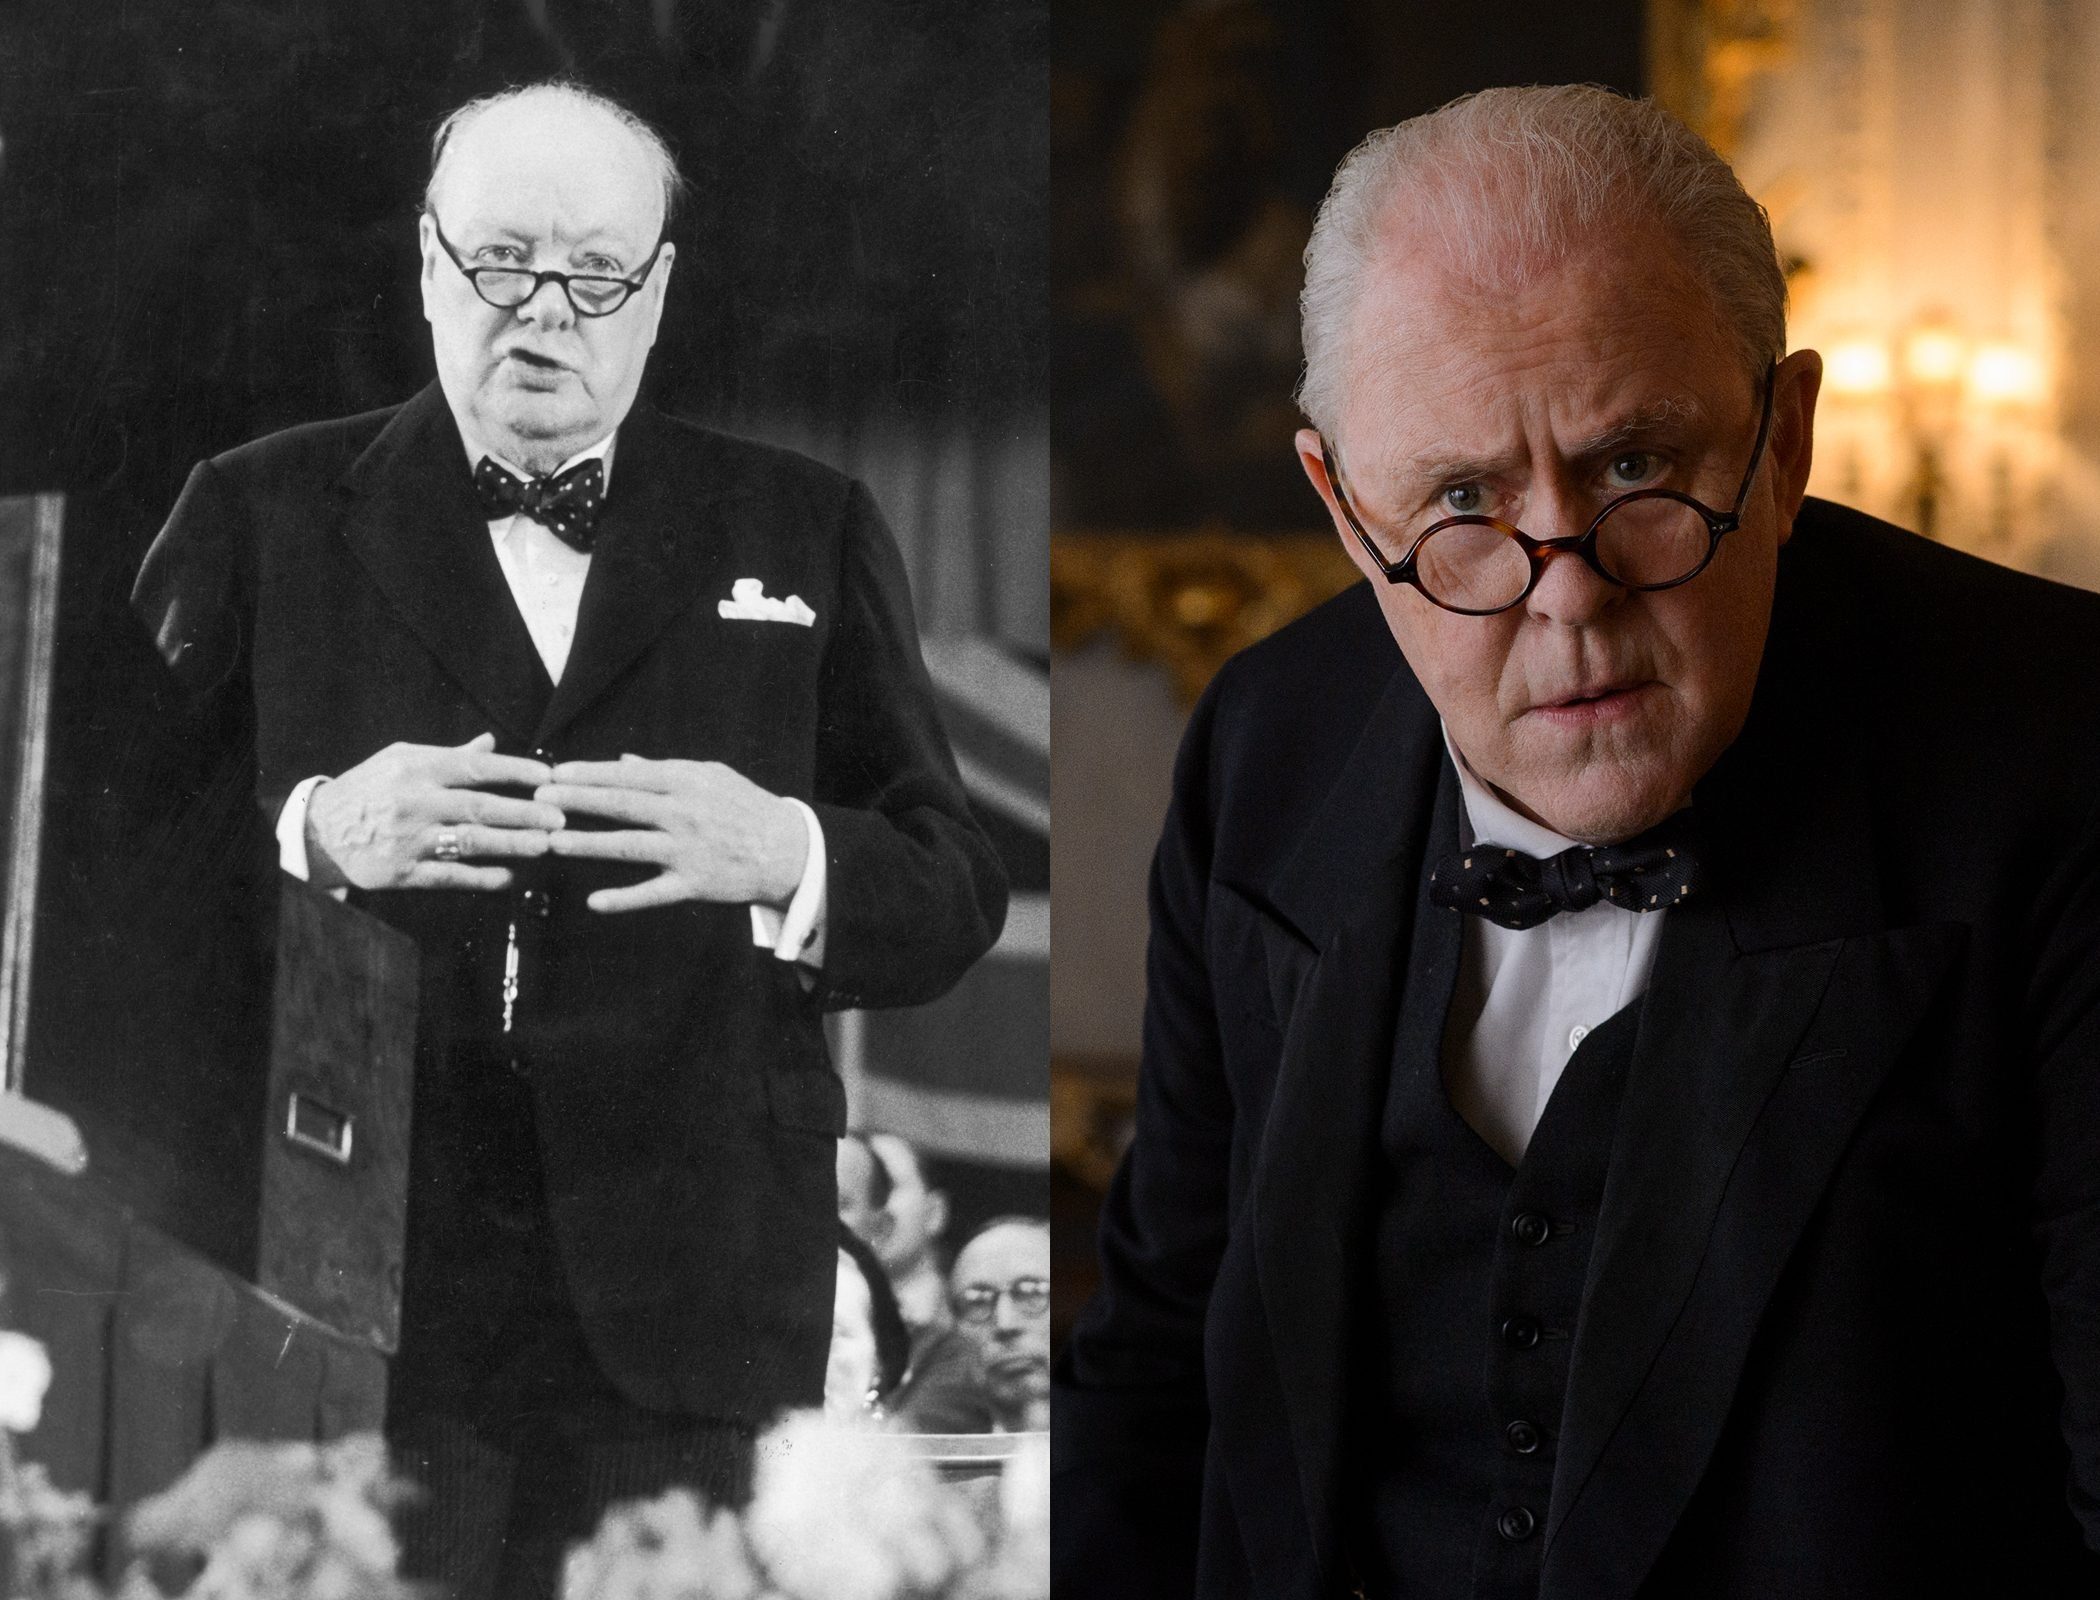 Sir Winston Churchill, as played by John Lithgow